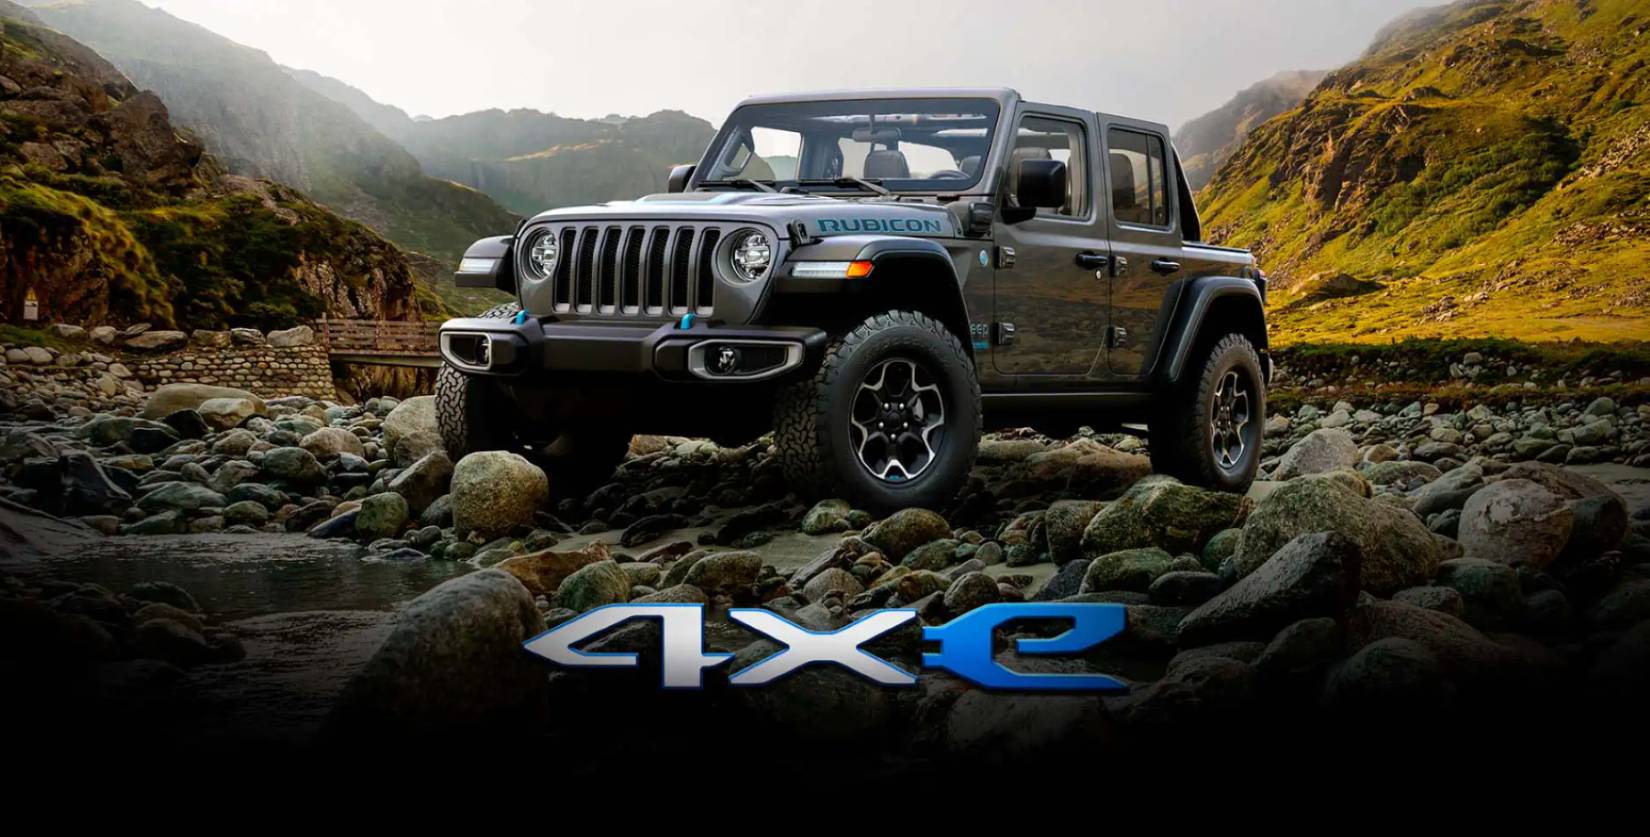 The Jeep Wrangler 4xe Is the Least Fuel-Efficient Plug-in Hybrid SUV on the  Market